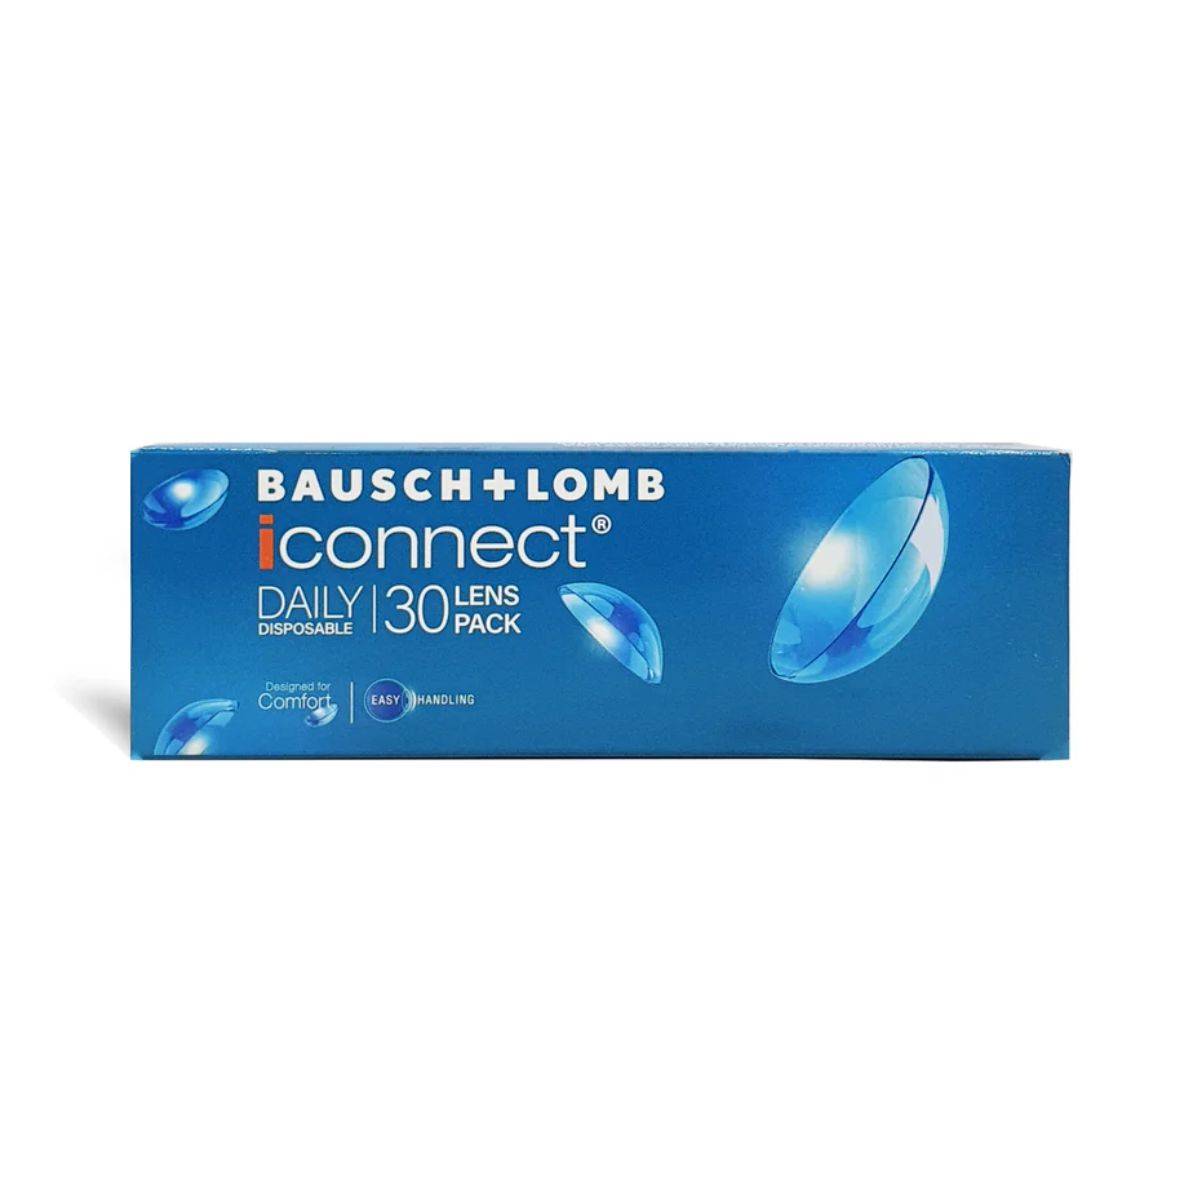 "Buy Bausch & Lamb iconnect Daily Disposable Contact Lenses | Optorium"